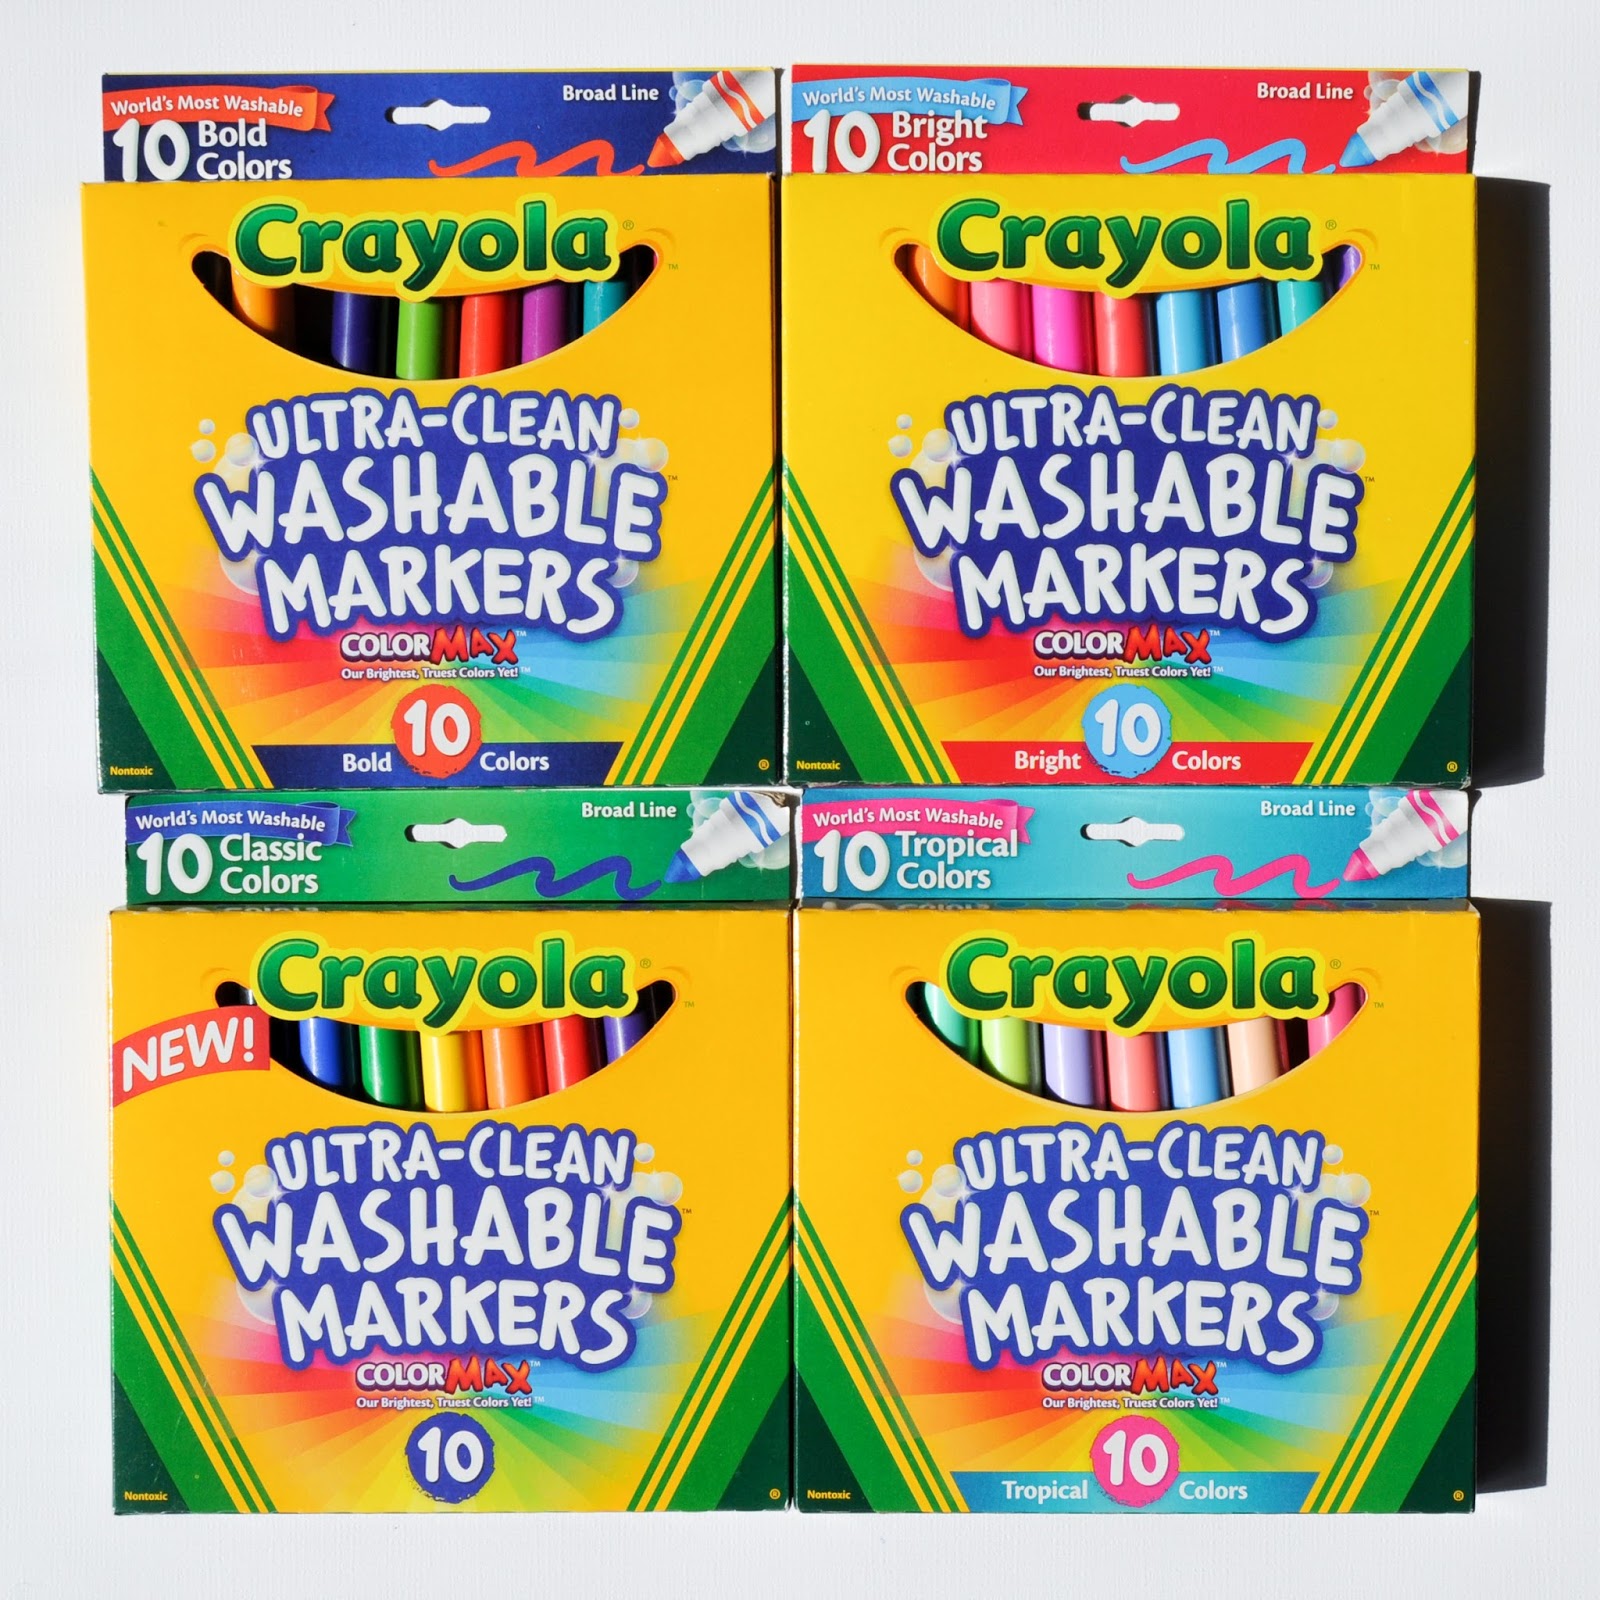 Crayola Ultra Clean Washable Markers Color Max What S Inside The Box Jenny S Crayon Collection